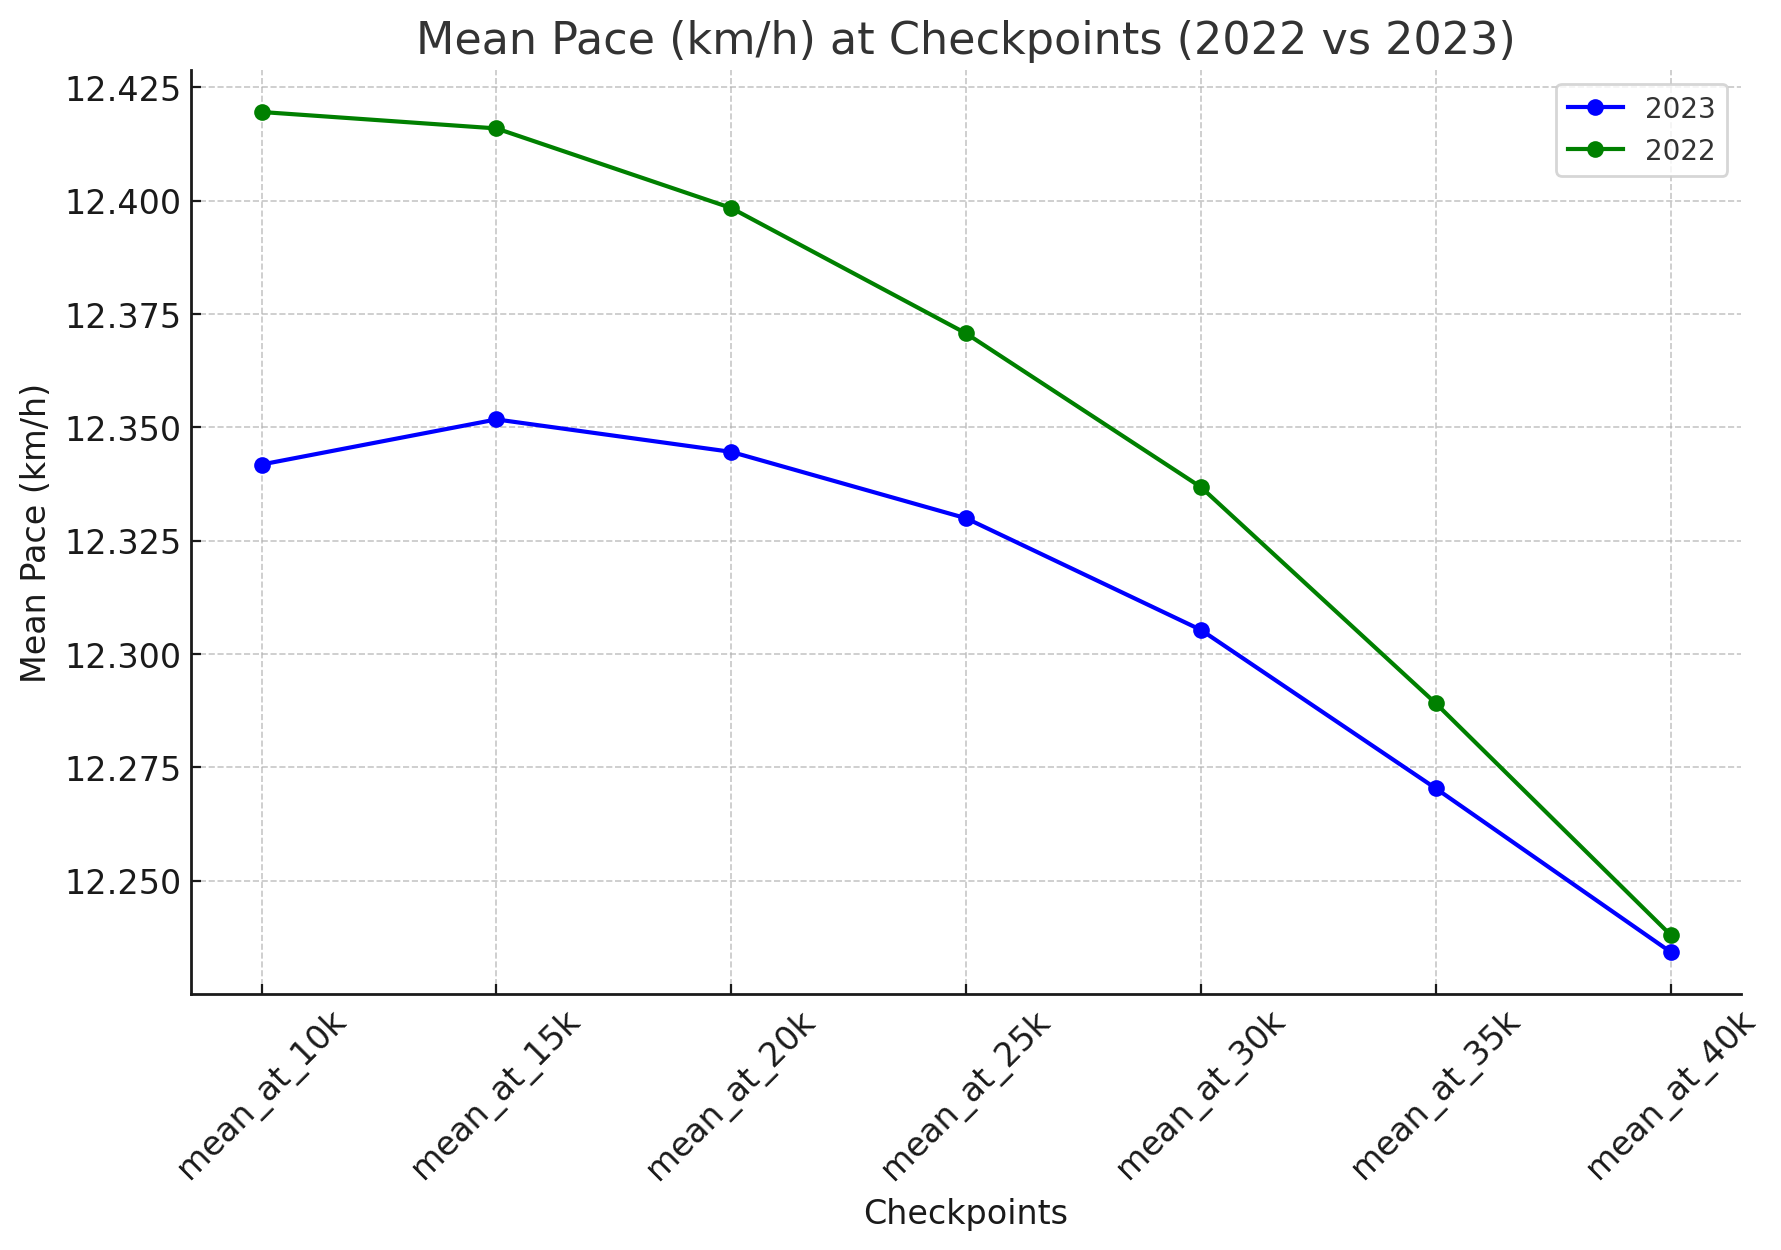 Mean Pace at Checkpoints